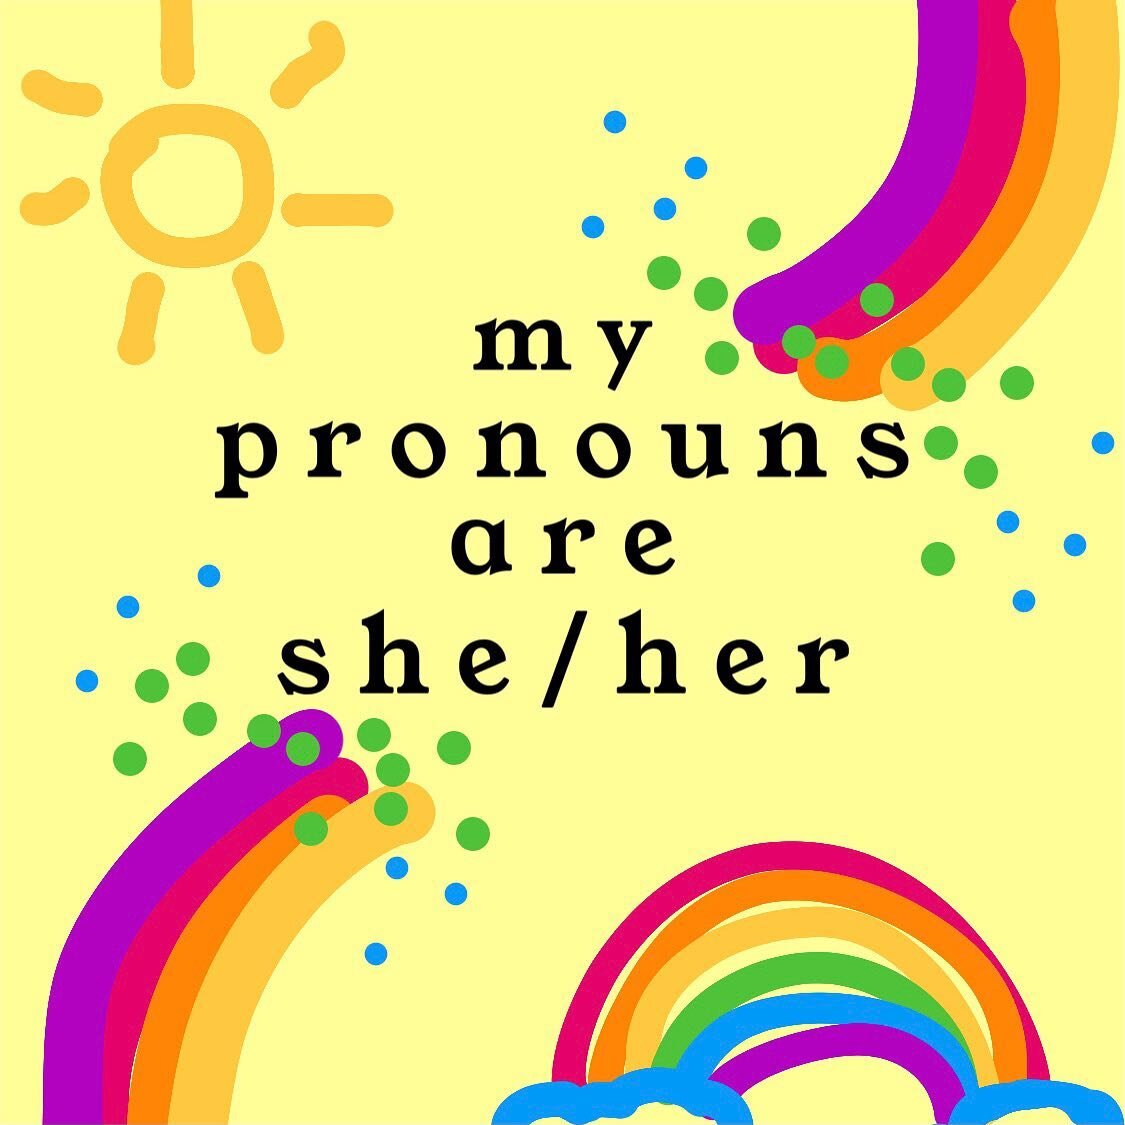 Pronoun graphics in honor of Non-binary Awareness Week! Reminder that one&rsquo;s pronouns do not equate to their gender identity! If I didn&rsquo;t get your pronouns, comment + I&rsquo;ll make a graphic for yours! 🏳️&zwj;⚧️🏳️&zwj;🌈